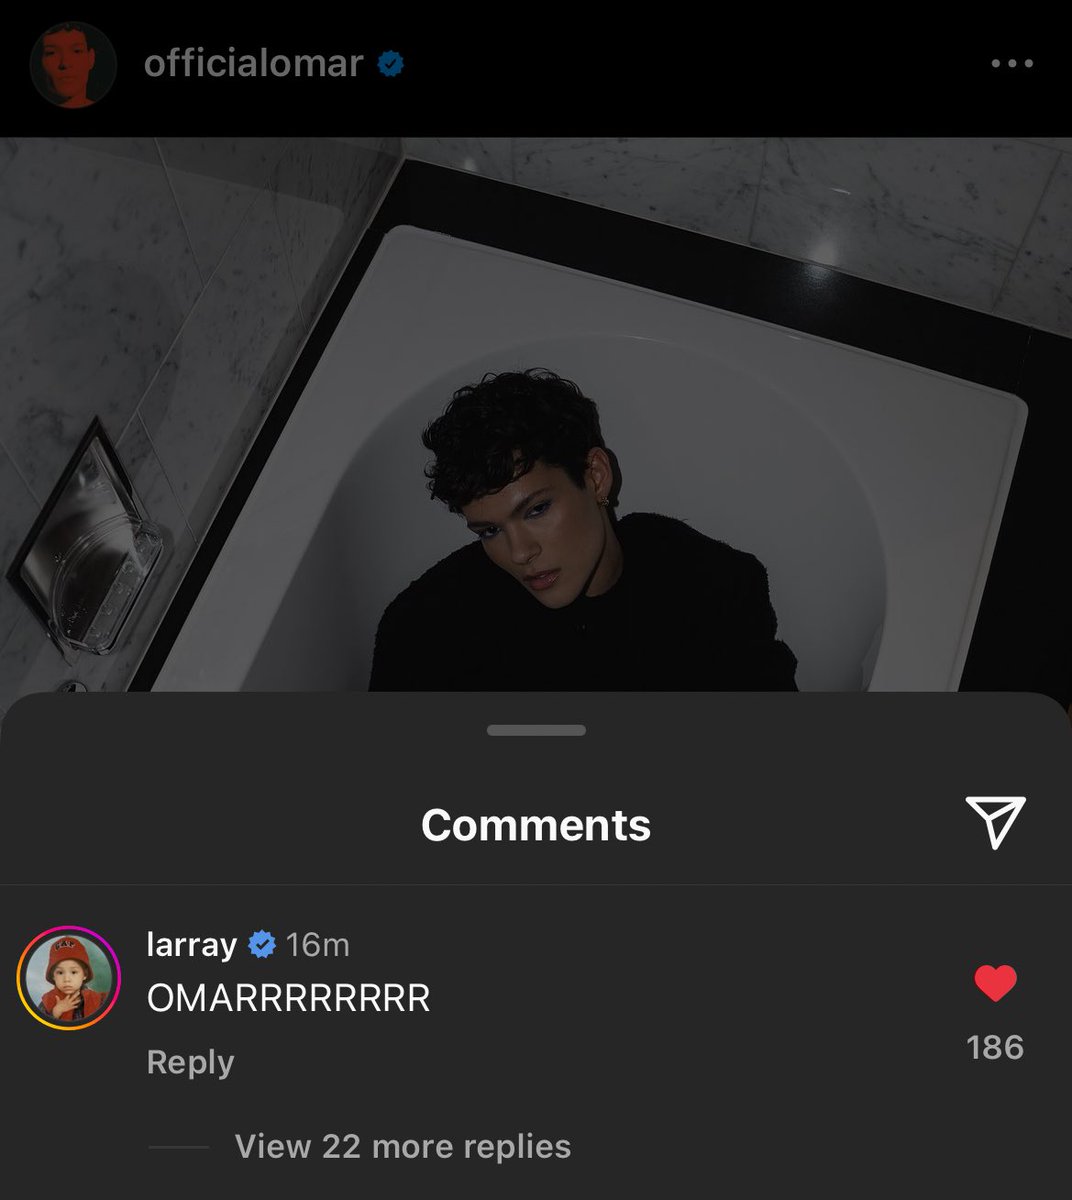 LARRAY COMMENTED ON OMAR’S IG POST